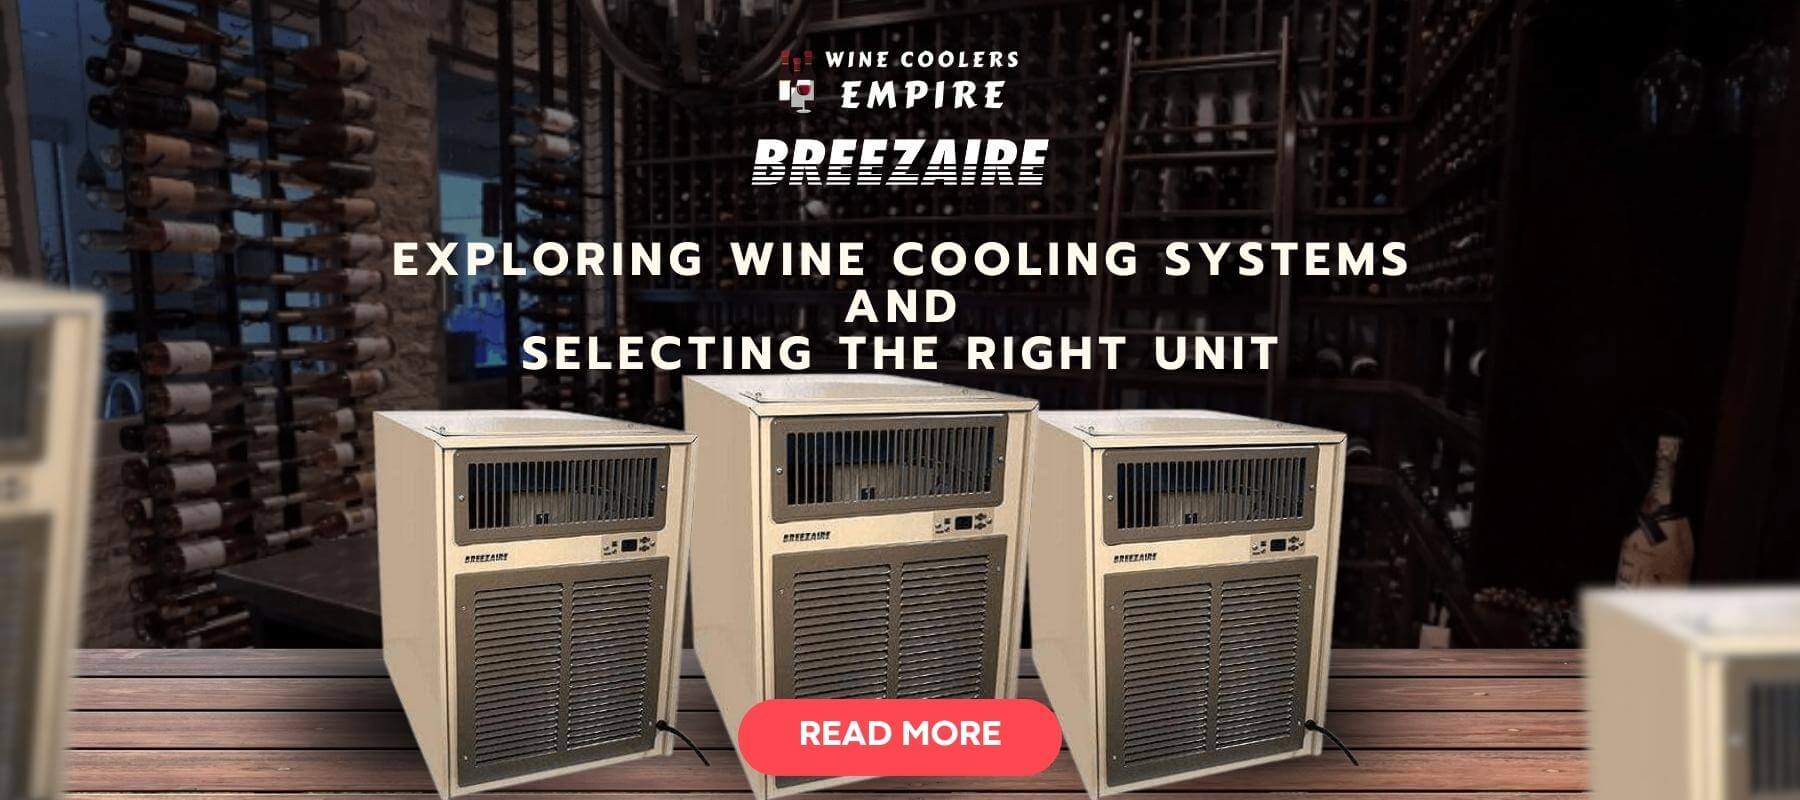 Breezaire: Exploring Wine Cooling Systems and Selecting the Right Unit